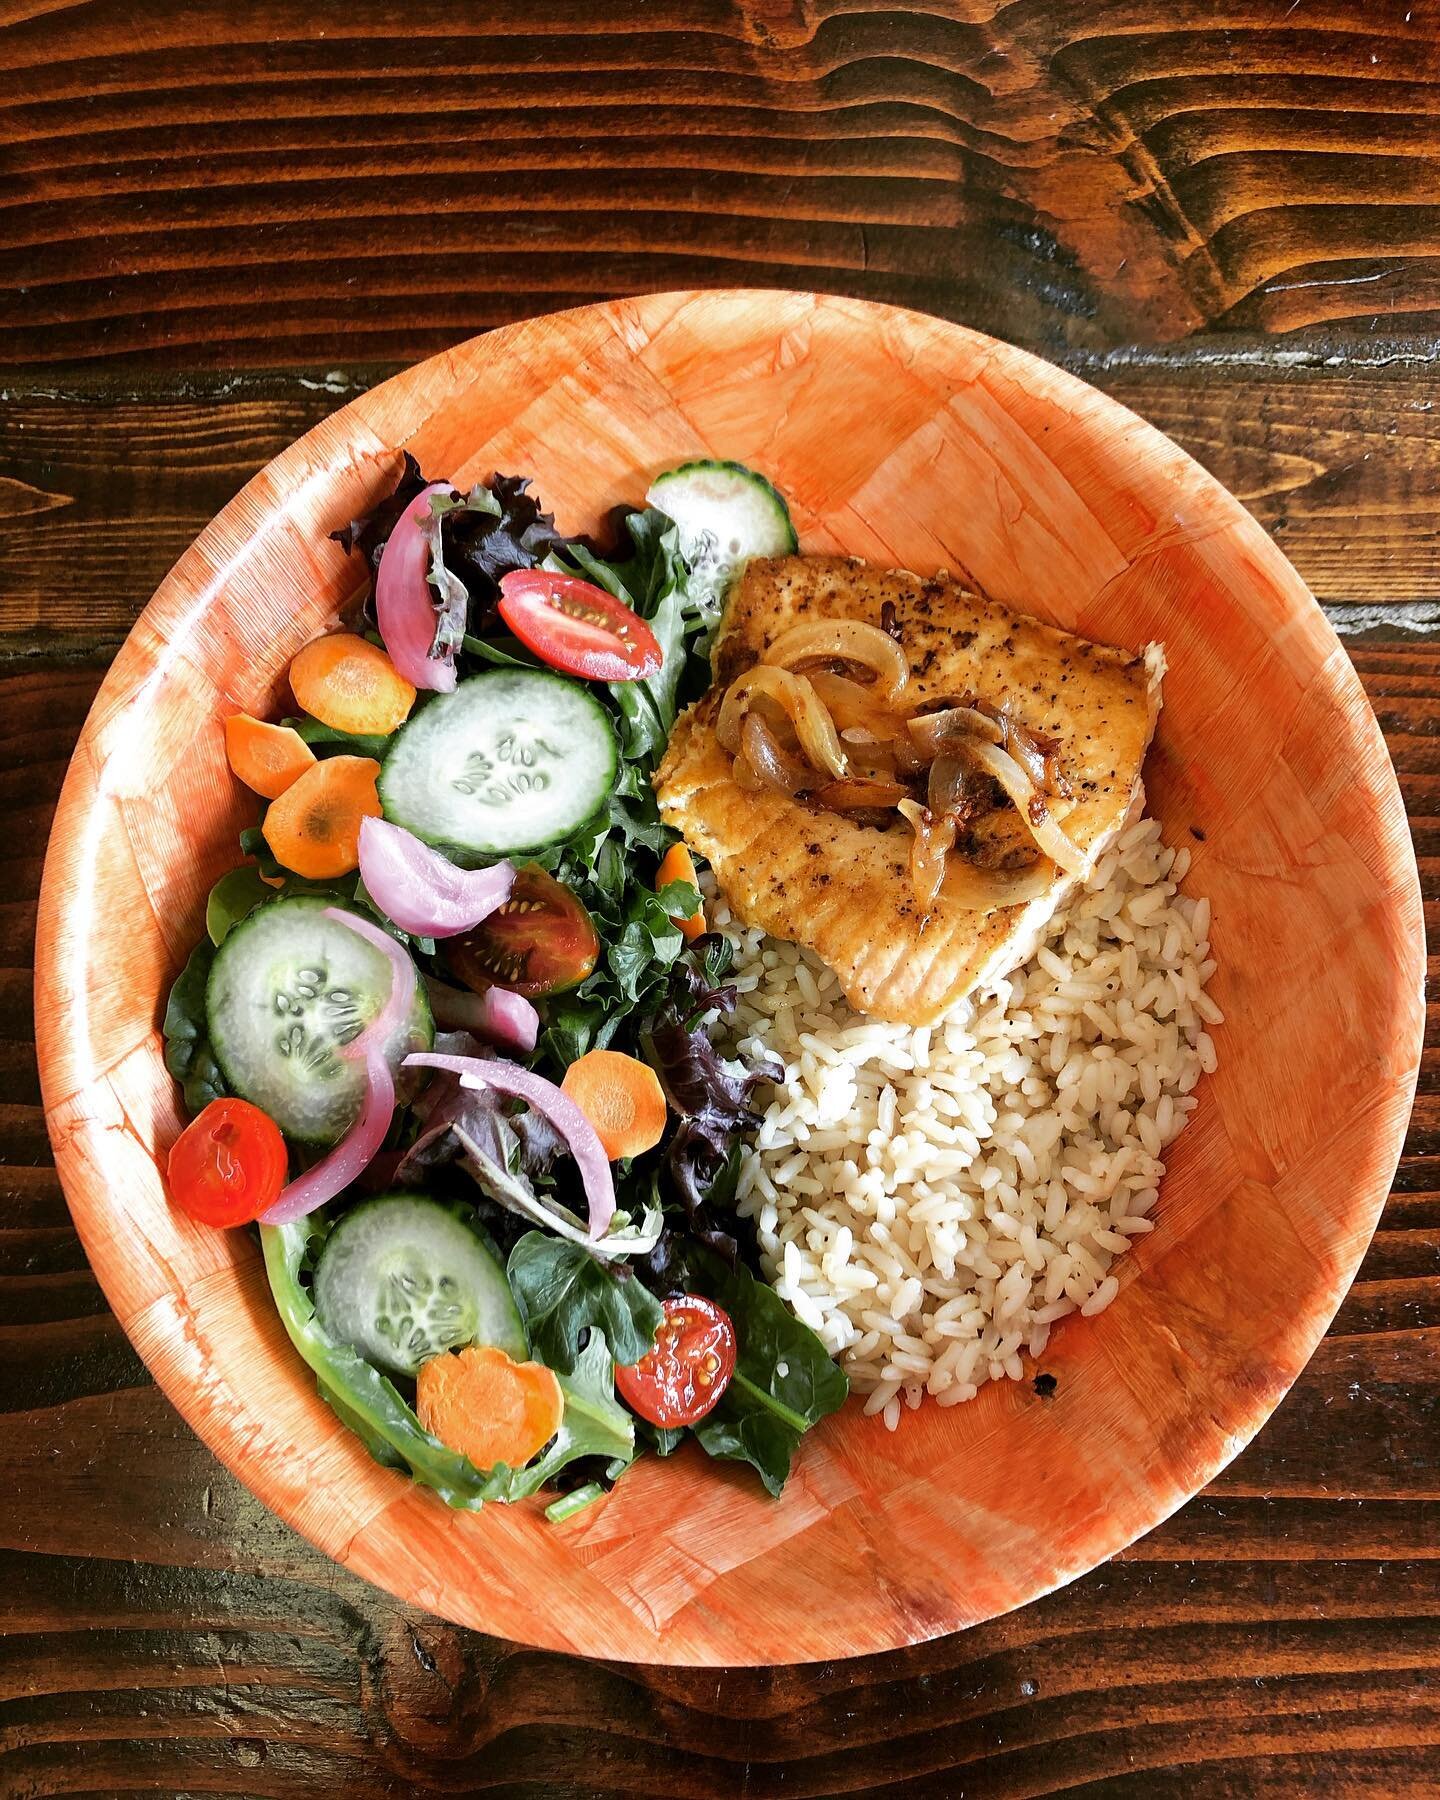 Pan-Seared Salmon is on the menu today! Selling for $10, it comes with our usual rice and side salad as well as roasted onions on top. 

Try it out and do let us know what you think!

Take care everyone!